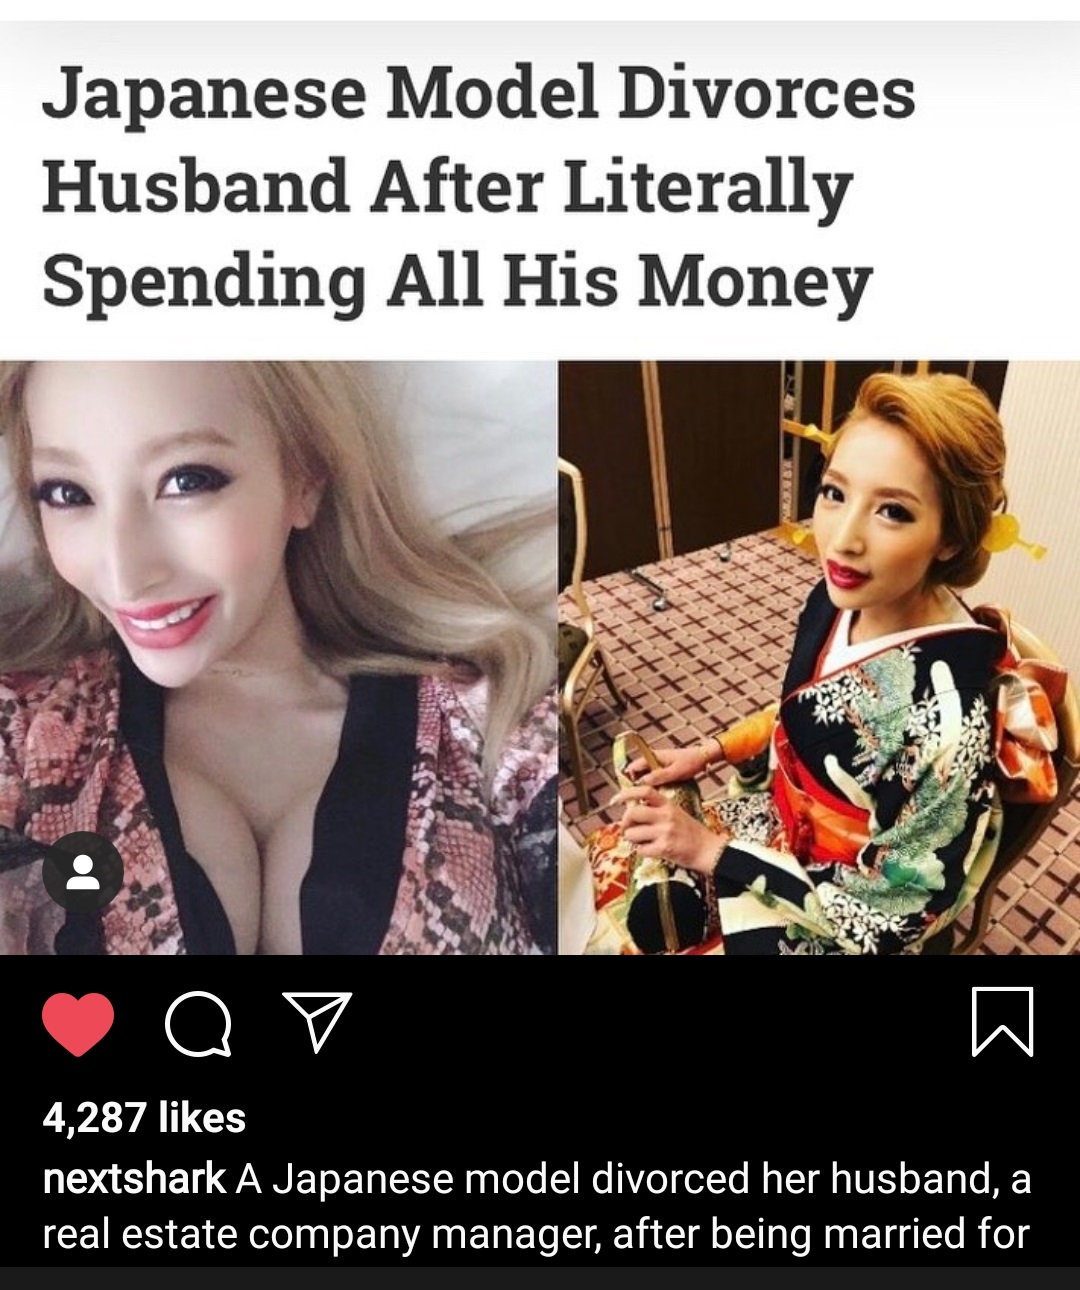 photo caption - Japanese Model Divorces Husband After Literally Spending All His Money Q 4,287 nextshark A Japanese model divorced her husband, a real estate company manager, after being married for